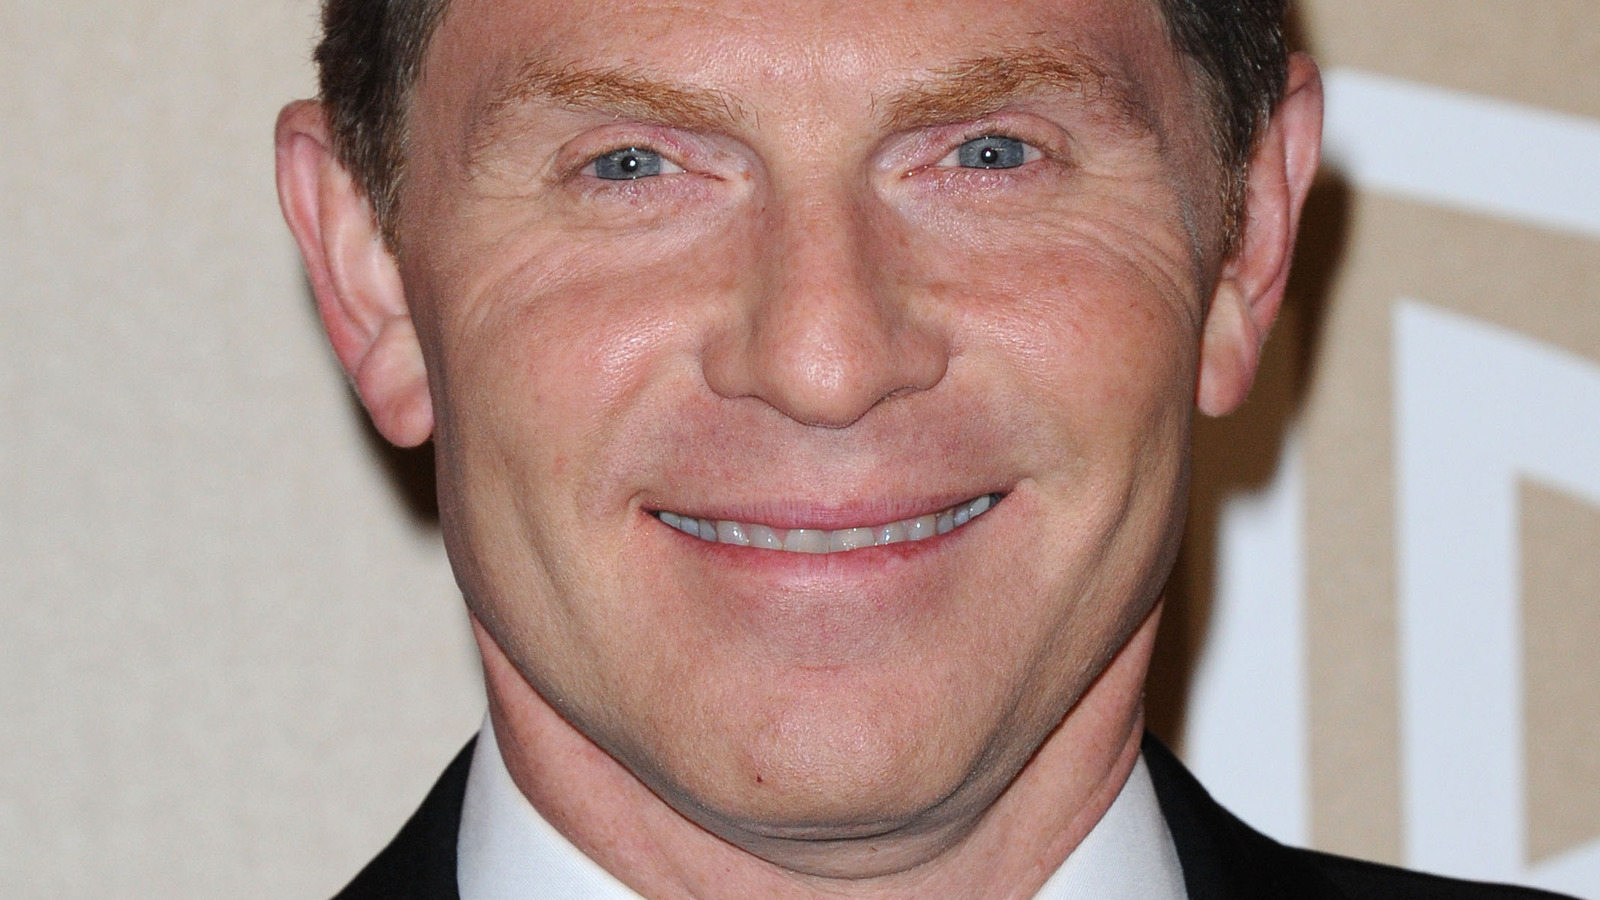 https://www.mashed.com/img/gallery/what-bobby-flay-really-thinks-about-food-thermometers/l-intro-1650915761.jpg